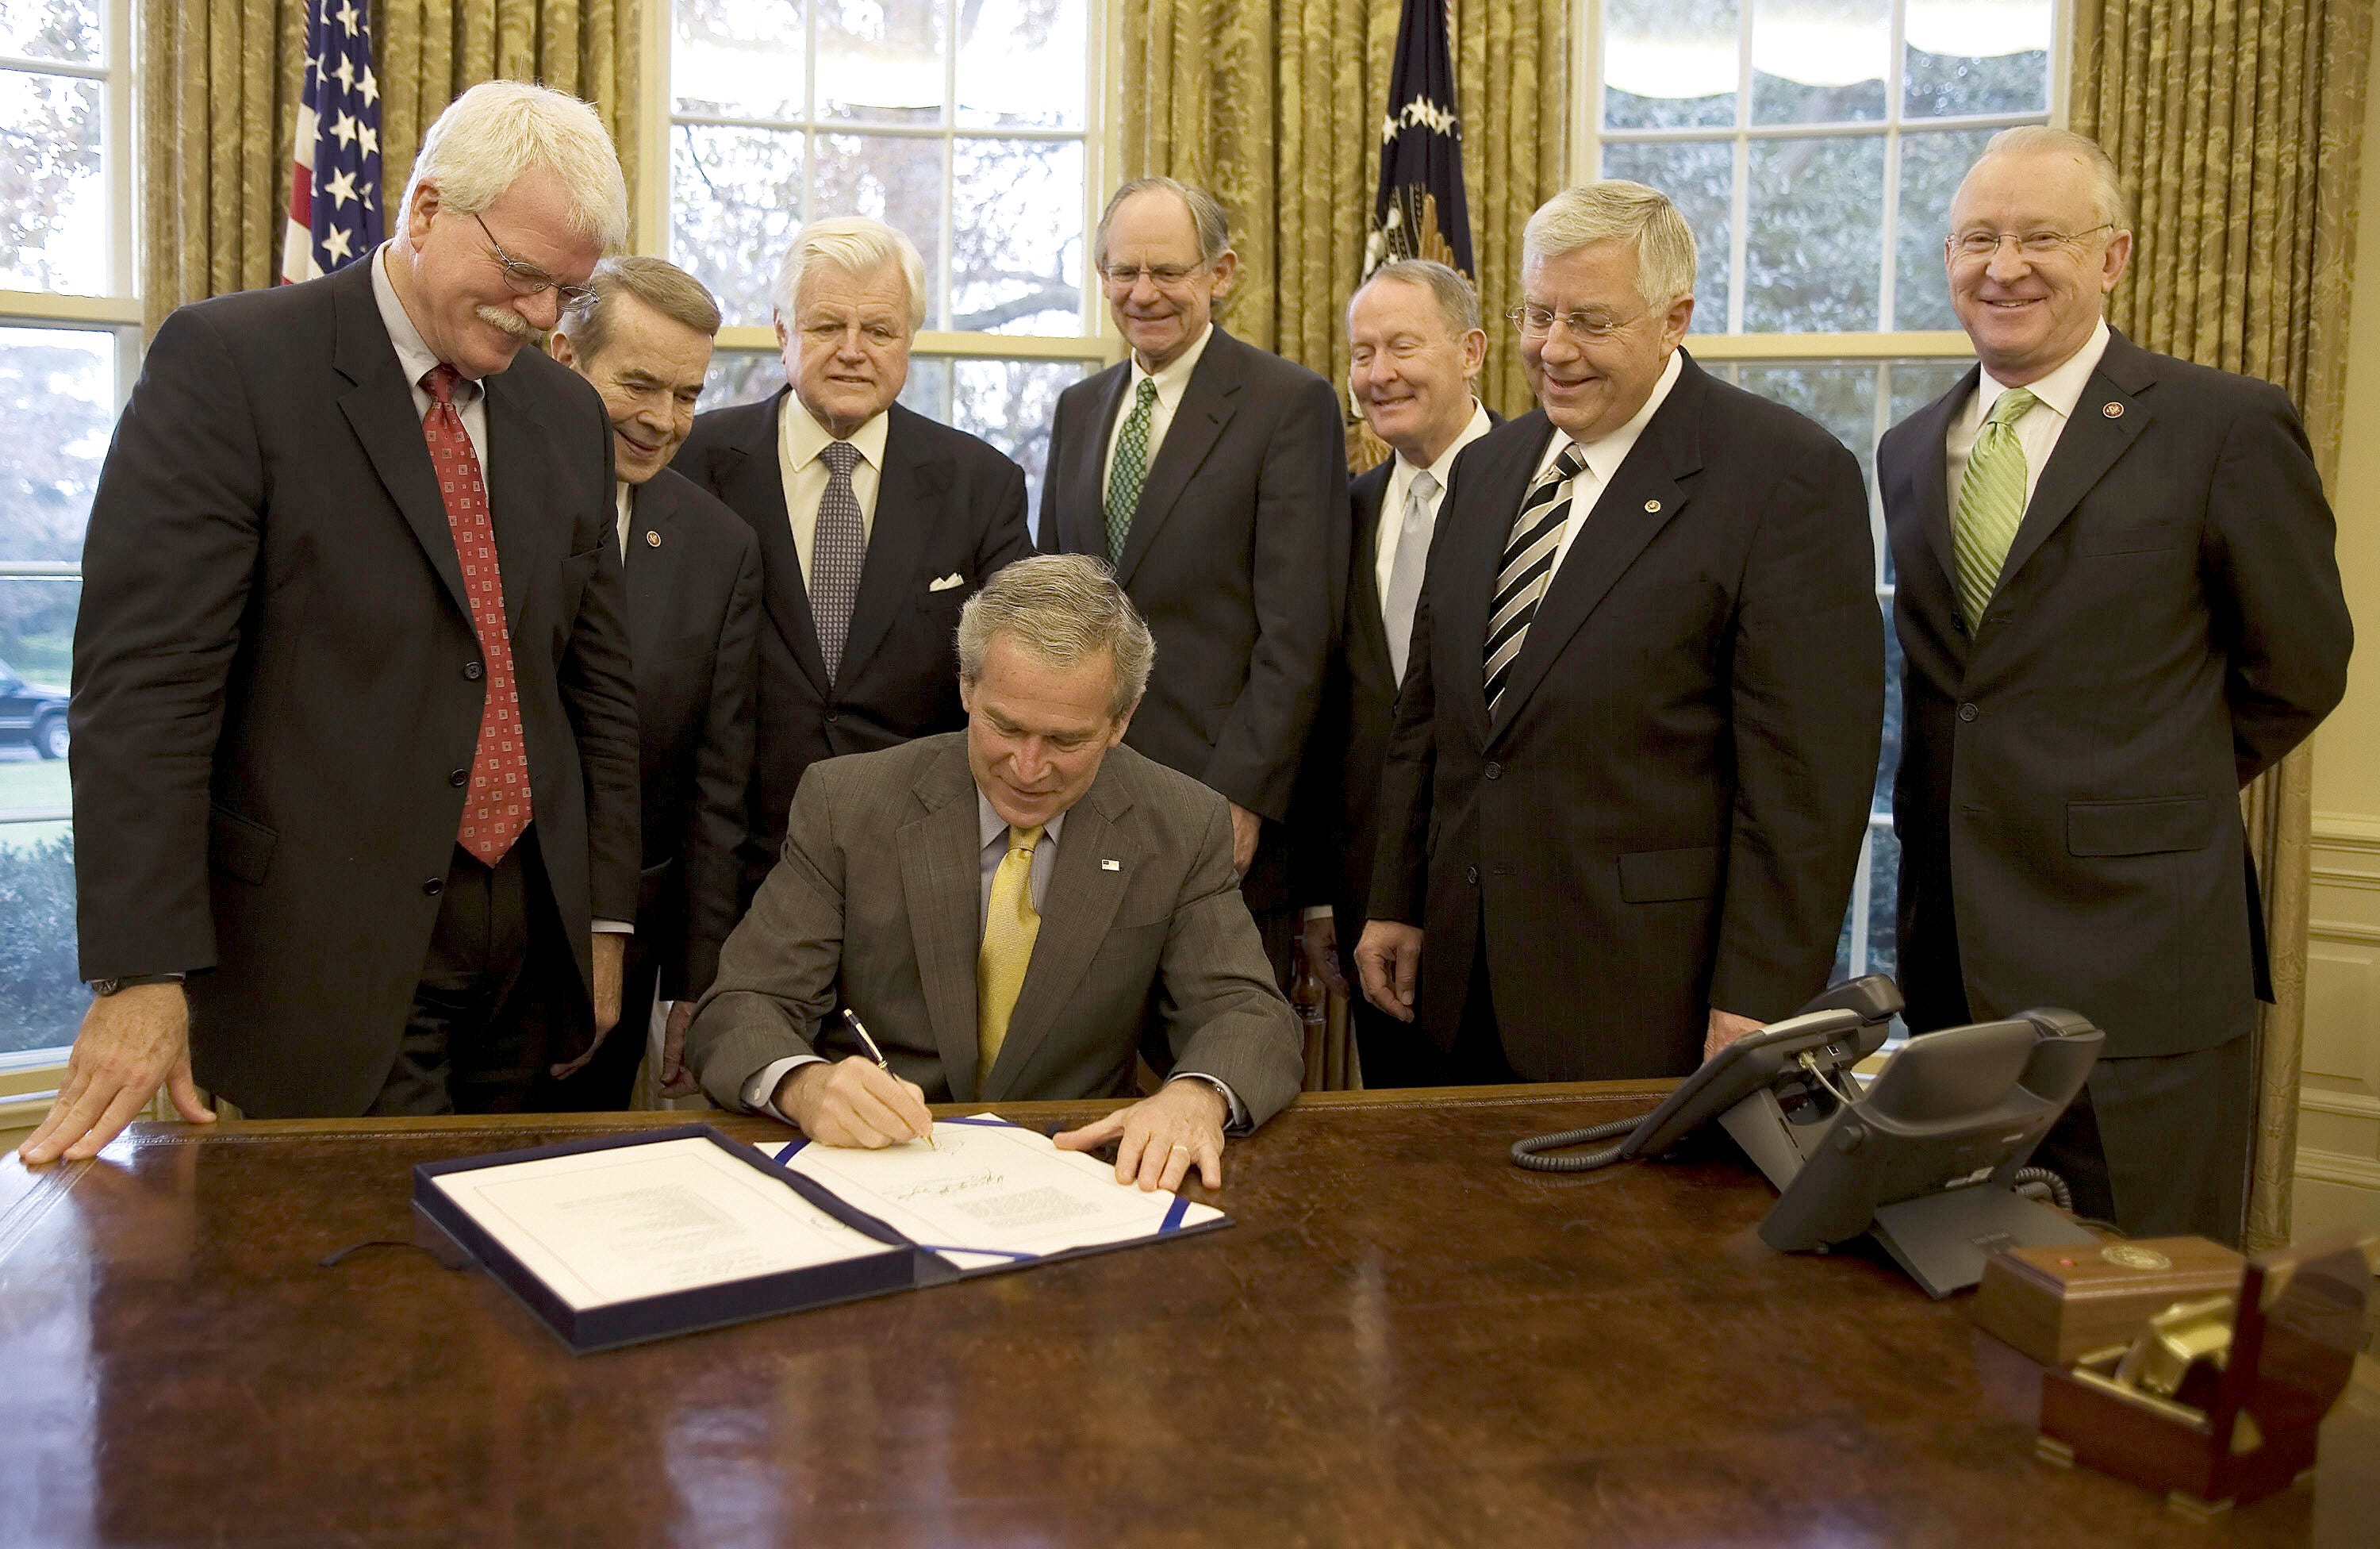 President George W. Bush (center) signs H.R. 1429, the Improving Head Start for School Readiness Act of 2007, with Congressman George Miller (left), D-Calif.; Congressman Dale Kildee (2nd from left), D-Michigan; U.S. Sen. Ted Kennedy (3rd from left), D-Mass.; Congressman Mike Castle (4th from left), R-Delaware; U.S. Sen. Lamar Alexander (3rd from right), R-Tenn.; U.S. Sen. Mike Enzi (2nd from right), R-Wyoming; and Congressman Buck McKeon (right), R-Calif., in the Oval Office of the White House in Washington, D.C., on Dec. 12, 2007.